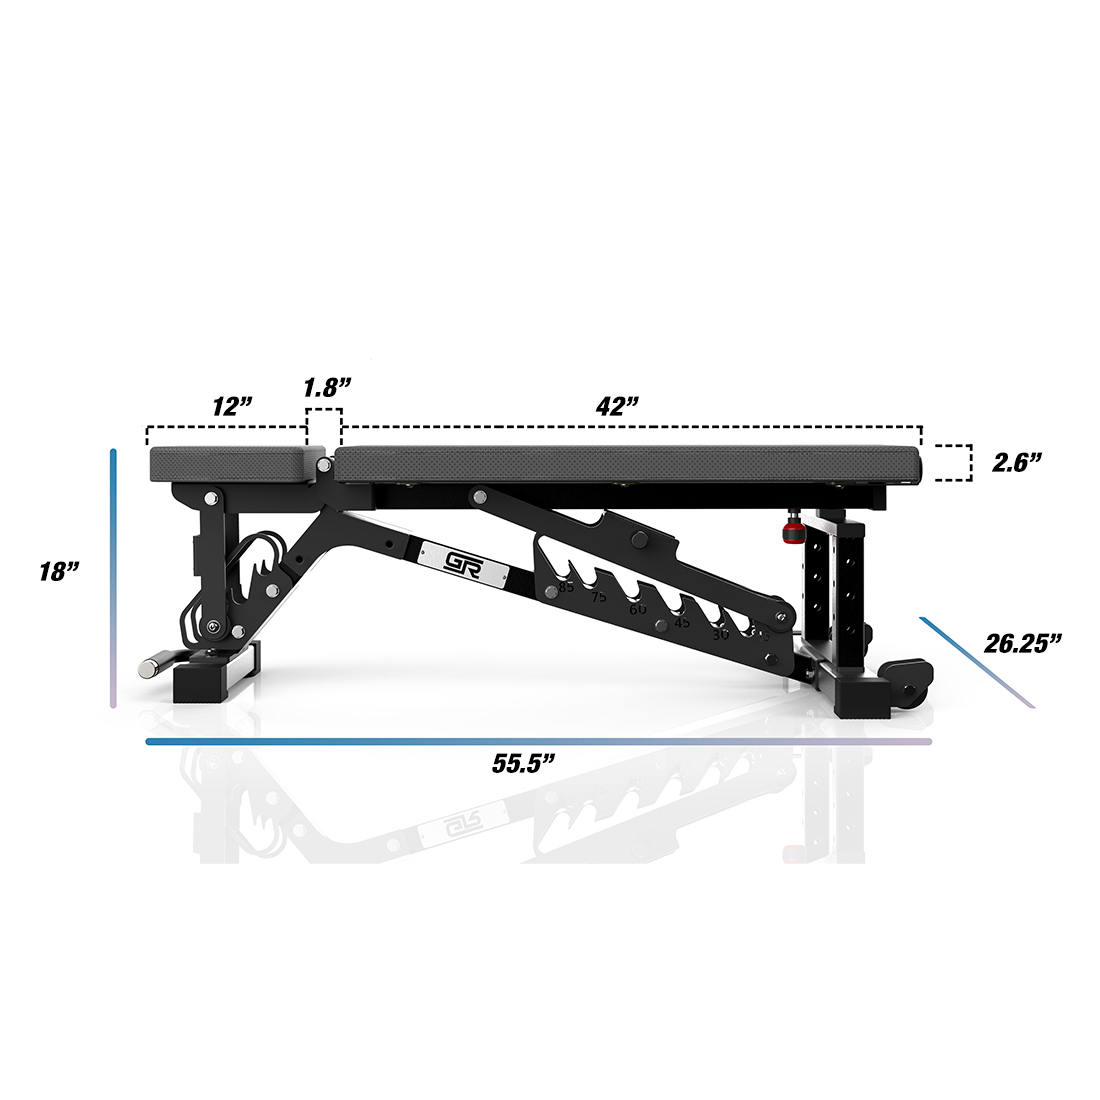 FIDAB-2 Bench product dimensions